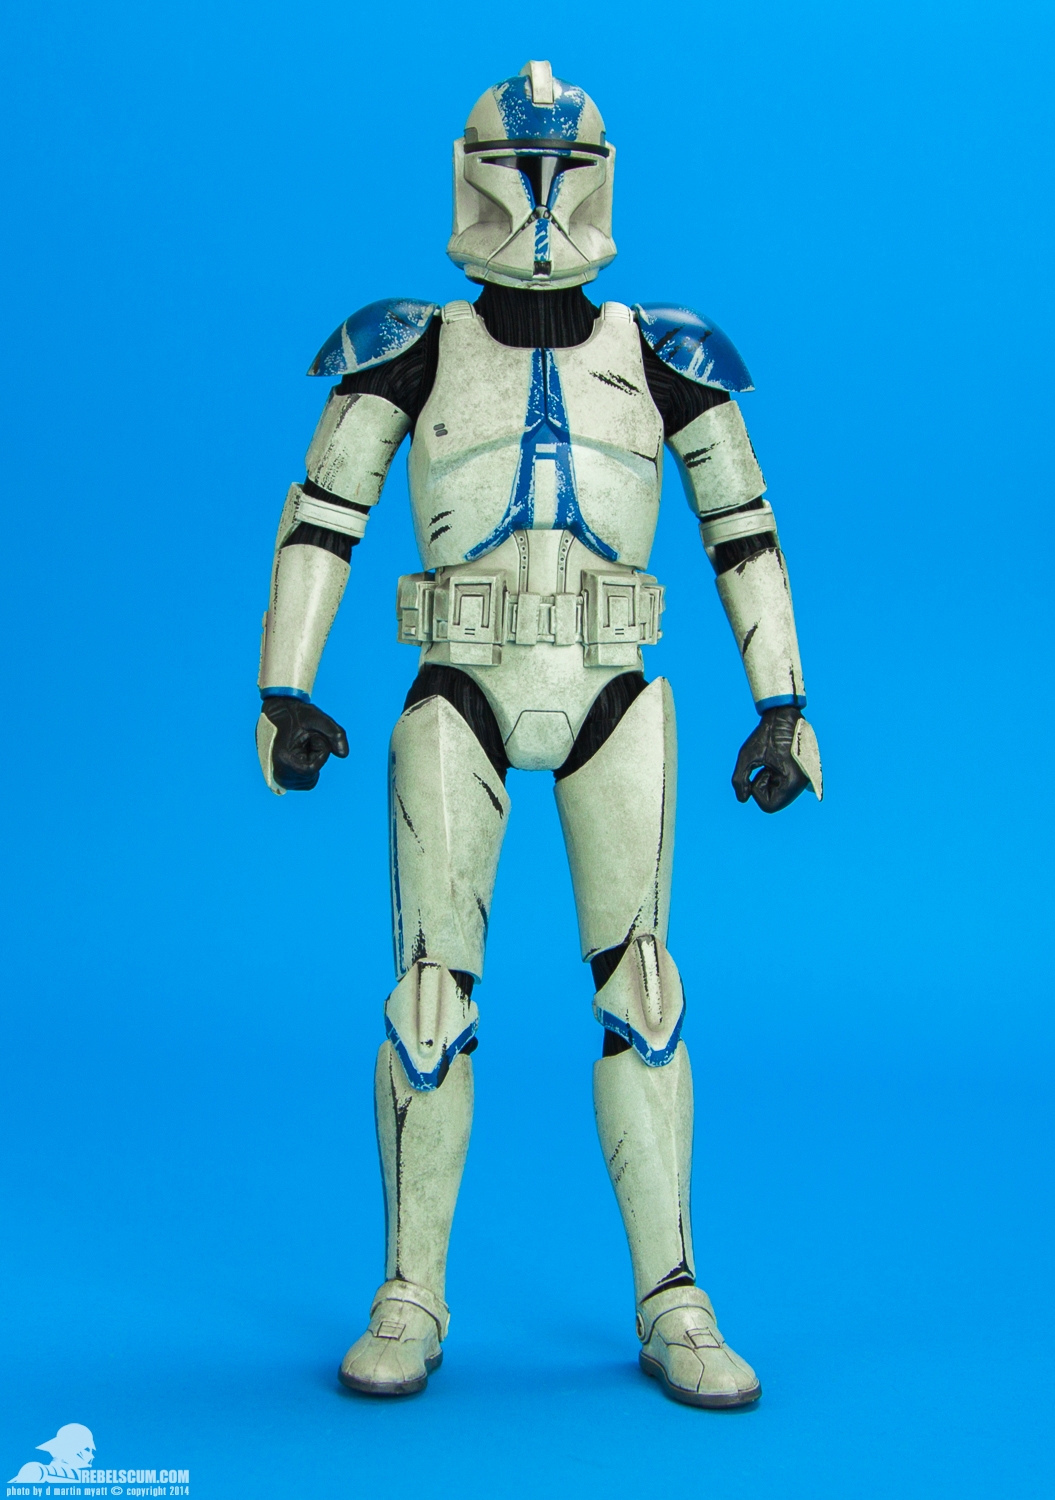 Clone-Trooper-Deluxe-501st-Sixth-Scale-Figure-Sideshow-001.jpg